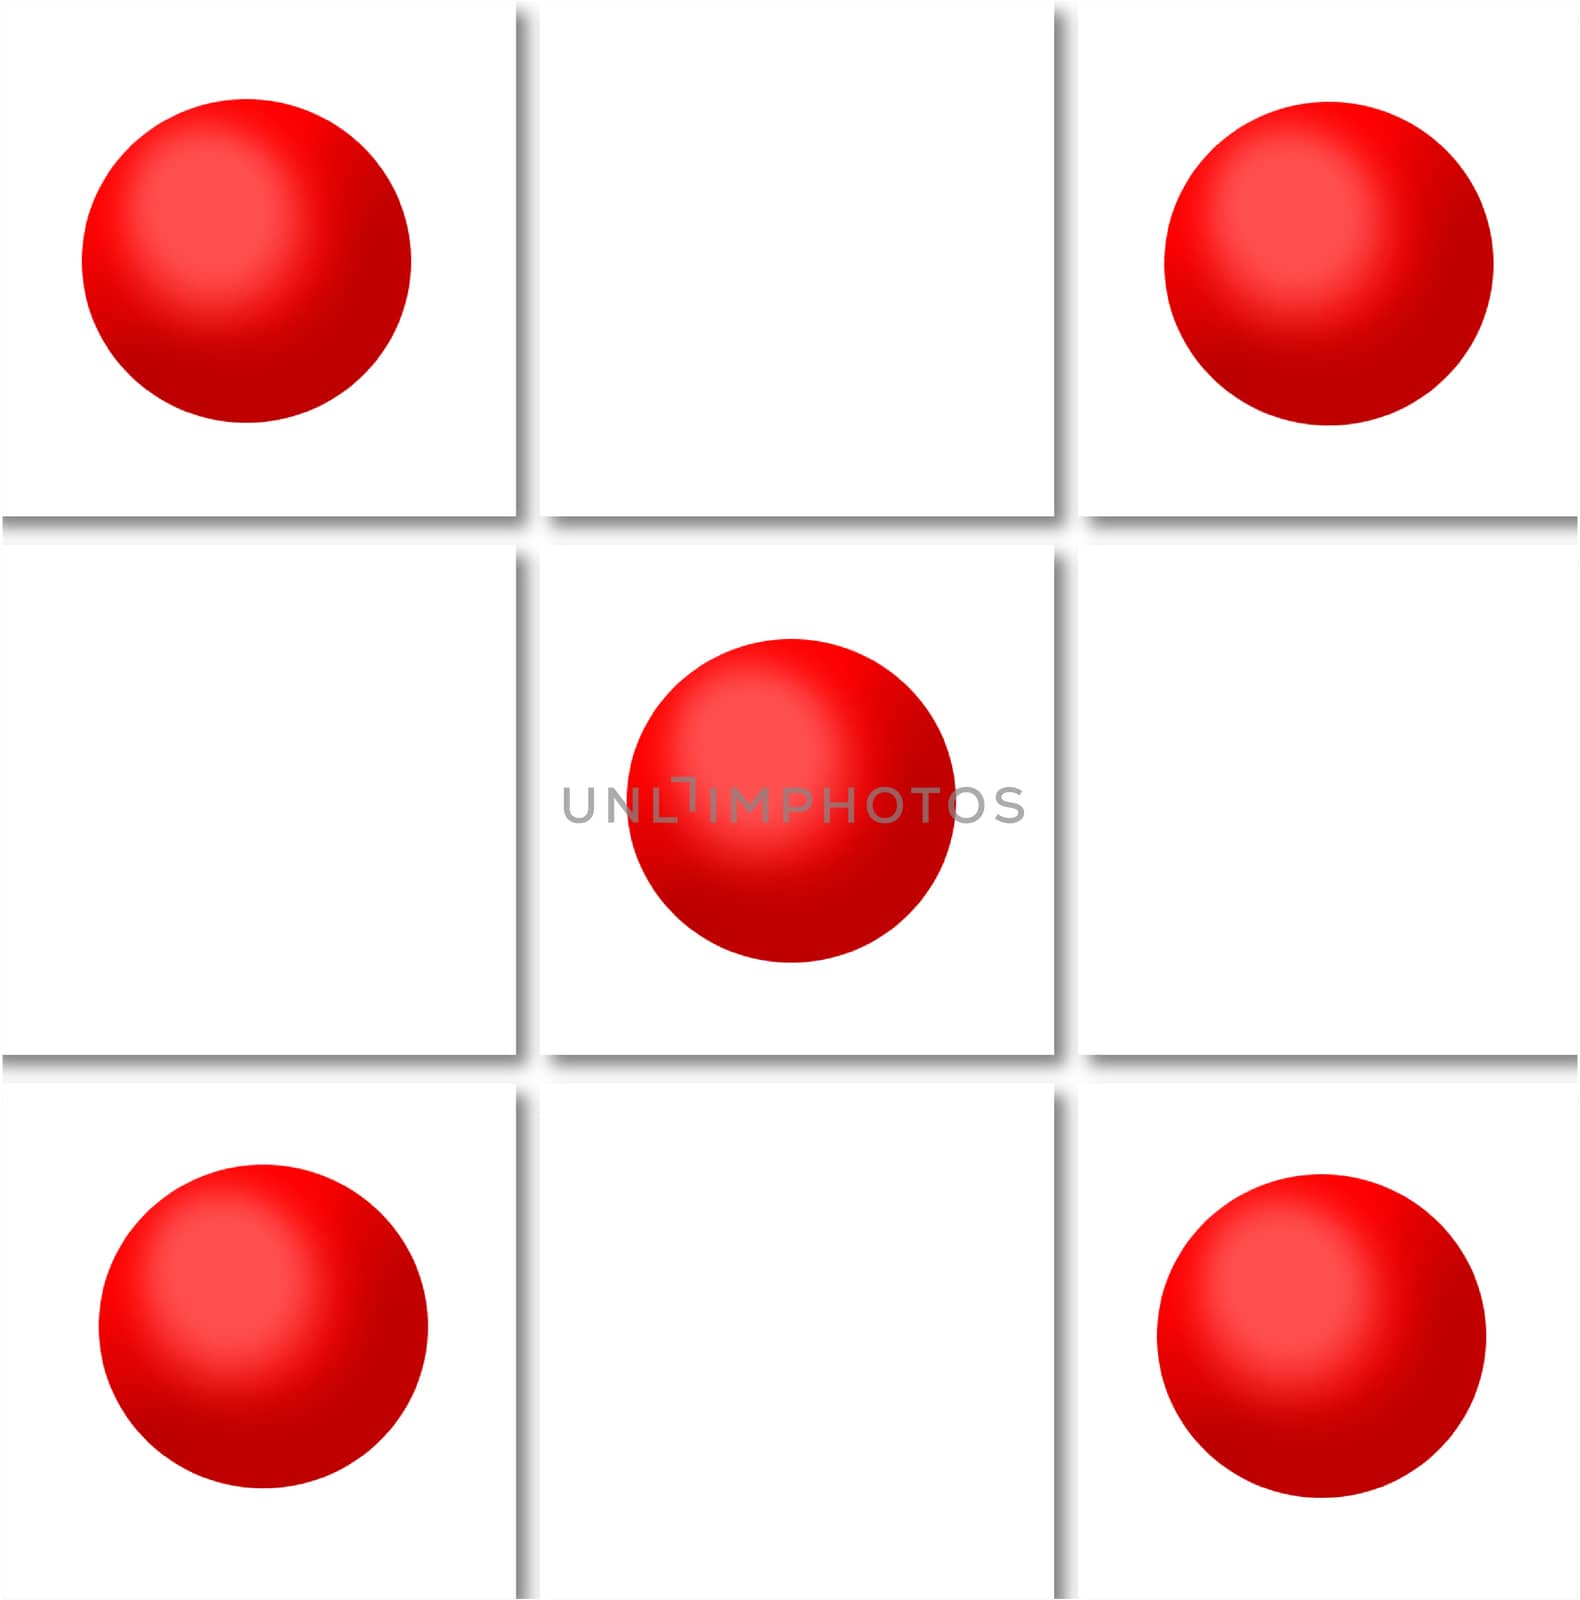 A pattern made of images of red 3 D spheres on white tiles. Illustration art.